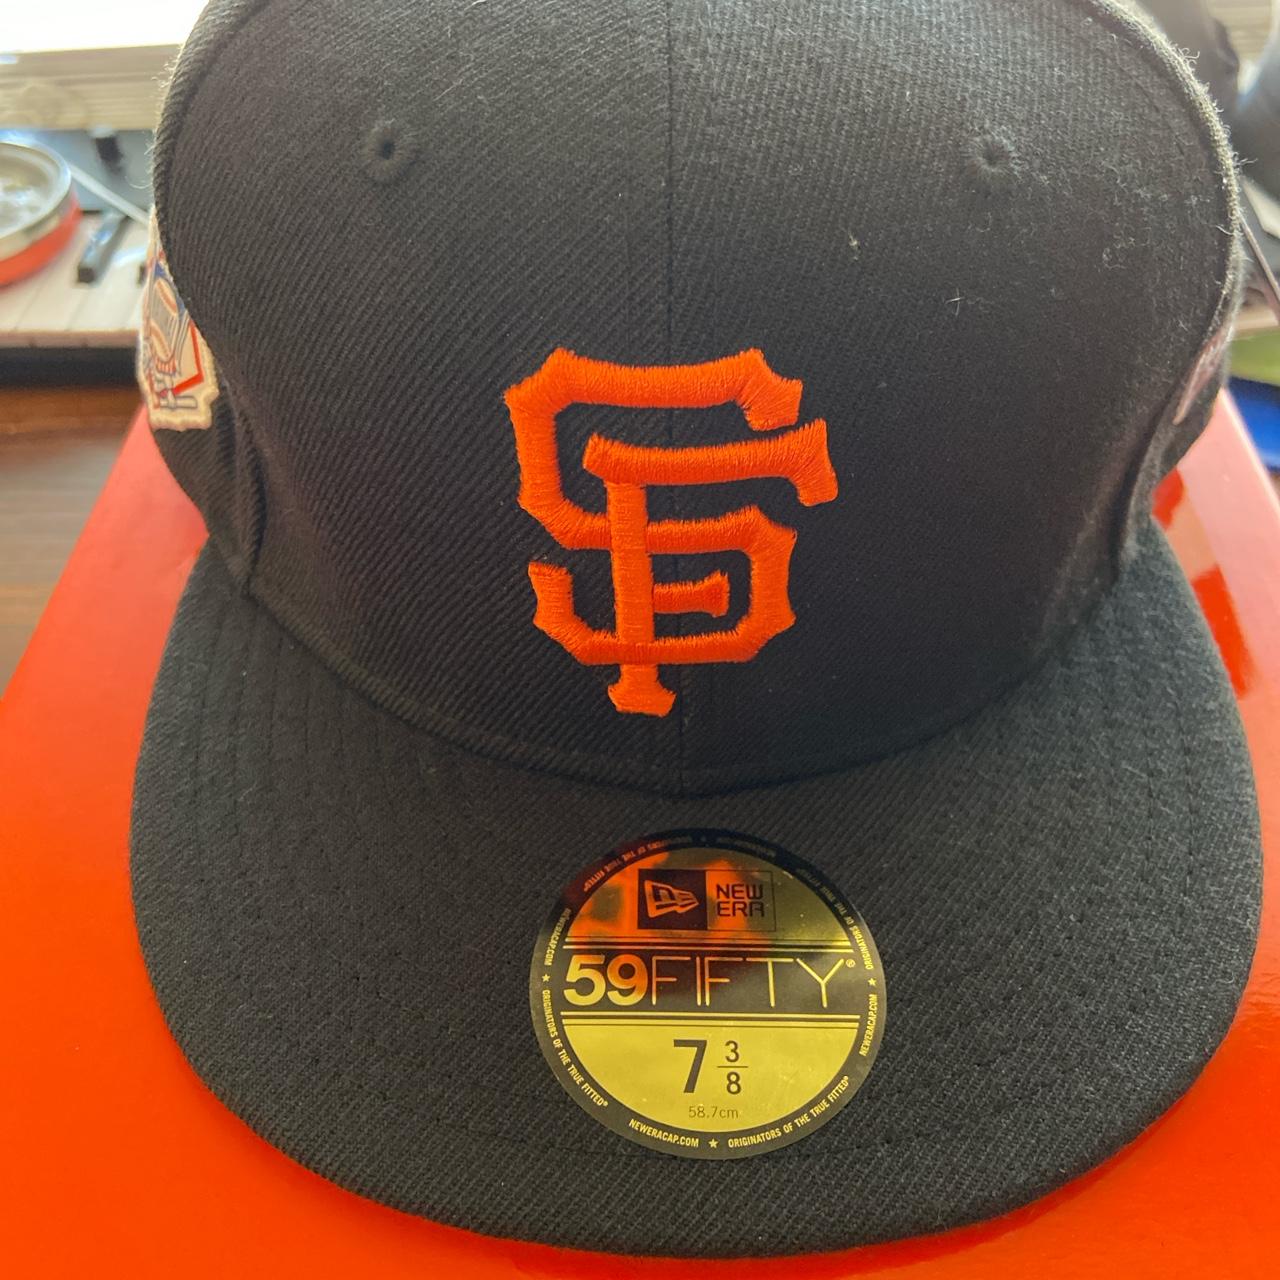 SF GIANTS X UNDEFEATED MLB COLLAB 7 3/8... - Depop